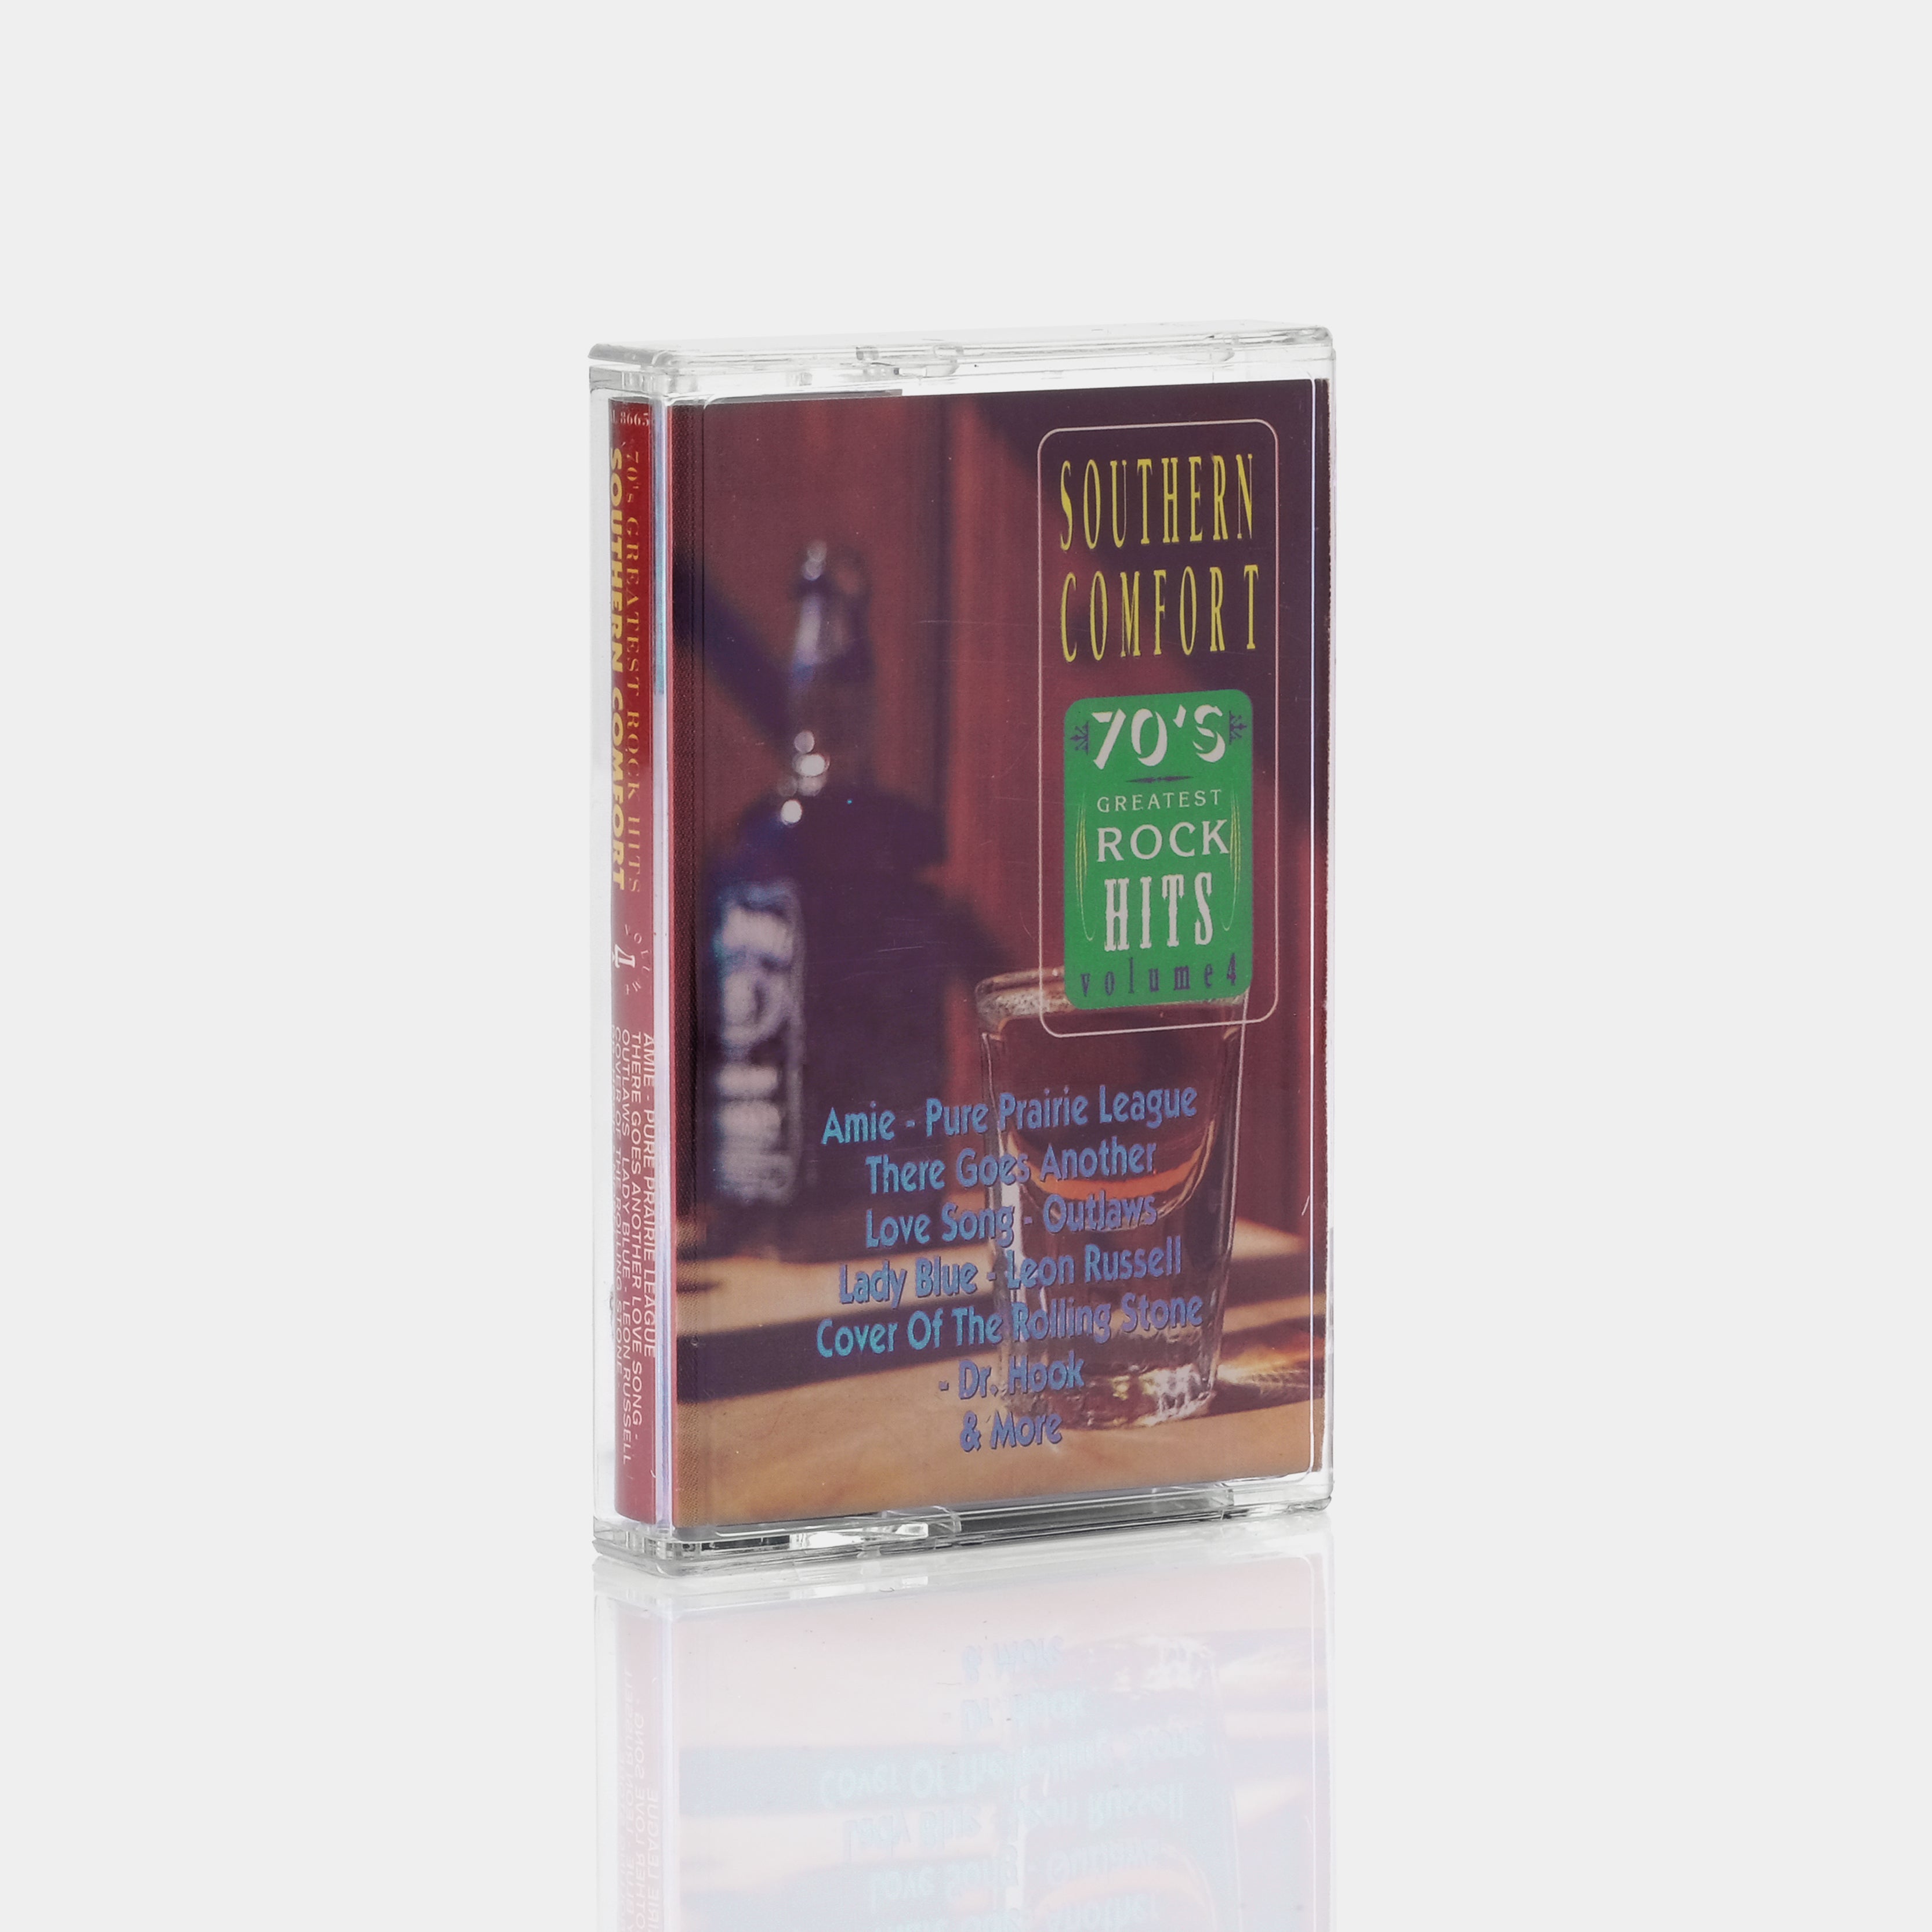 70's Greatest Rock Hits Southern Comfort (Vol. 4) Cassette Tape